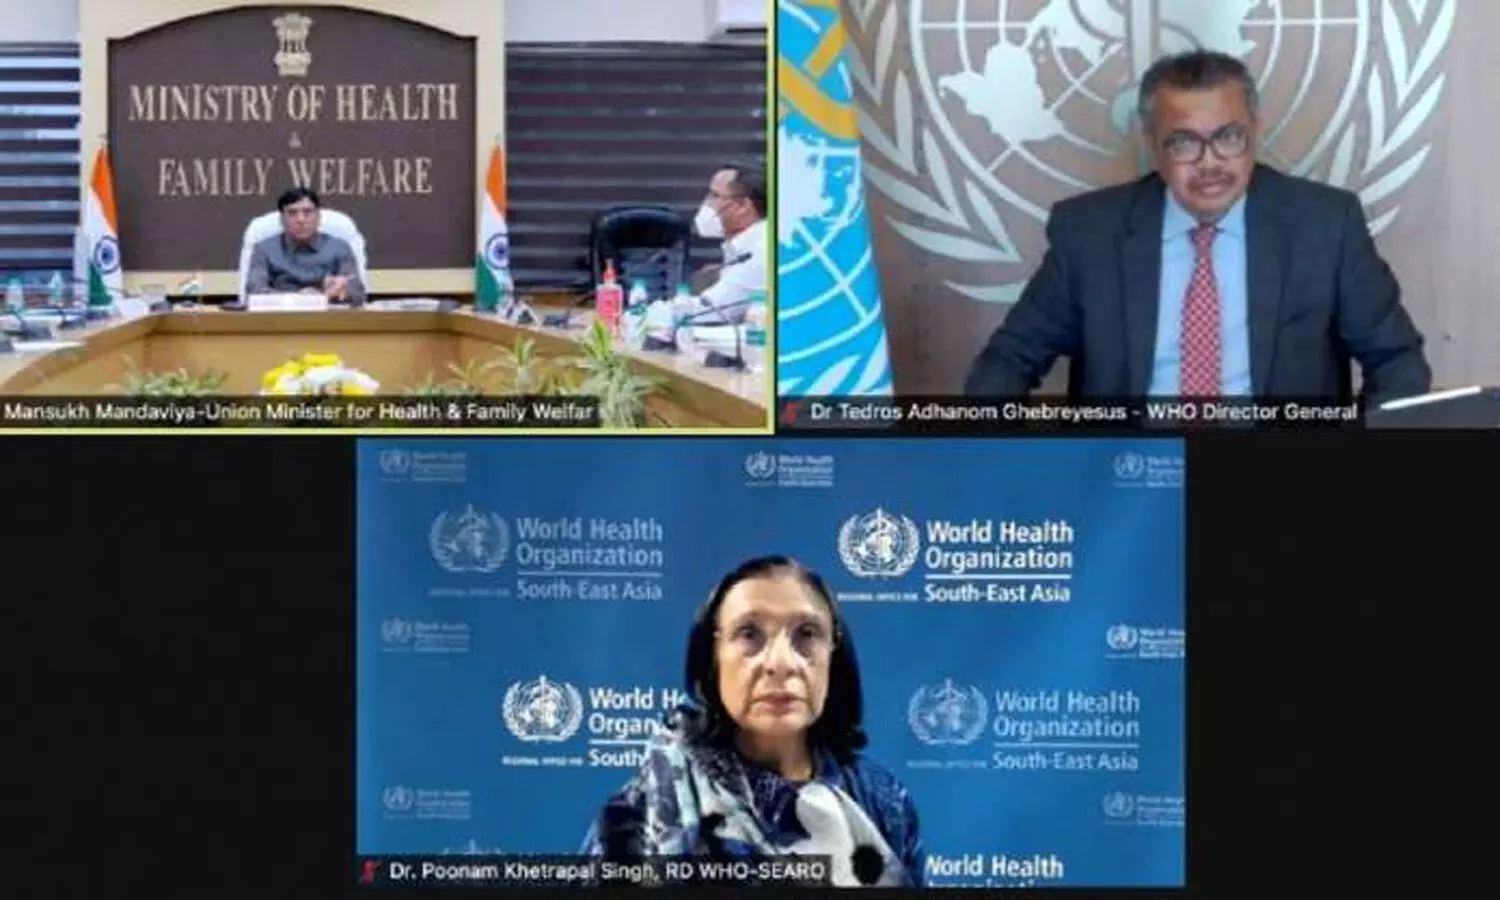 WHO appreciates vaccination drive in India; Tedros hold detailed interaction with Mansukh Mandaviya